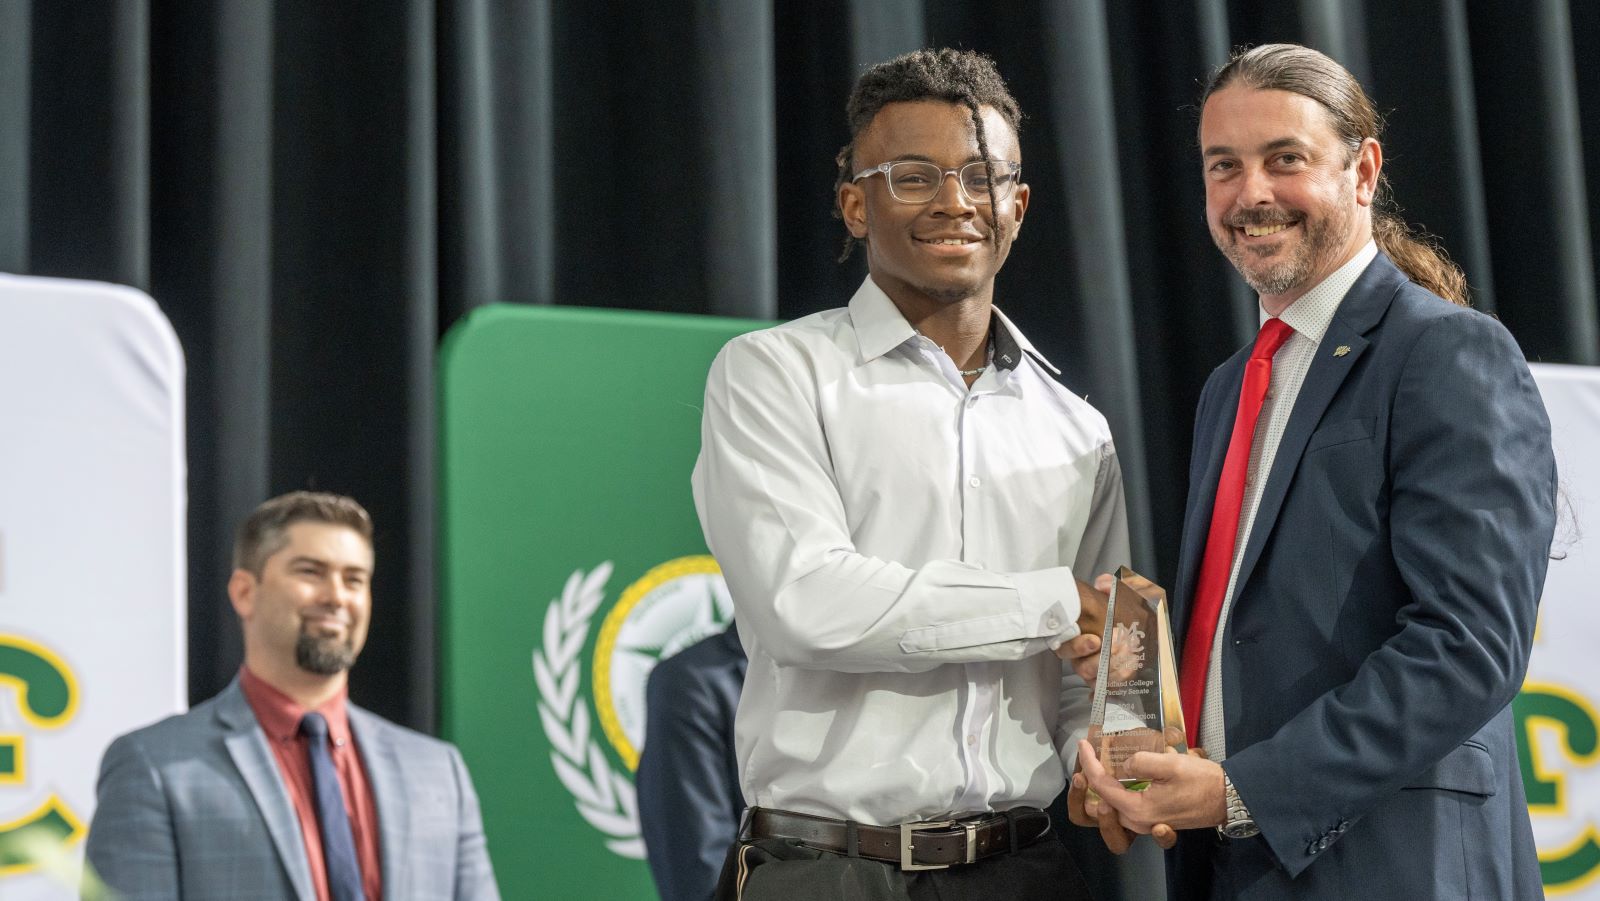 sElvis Dominic receives the Chap Champion award from Dr. Damon Kennedy